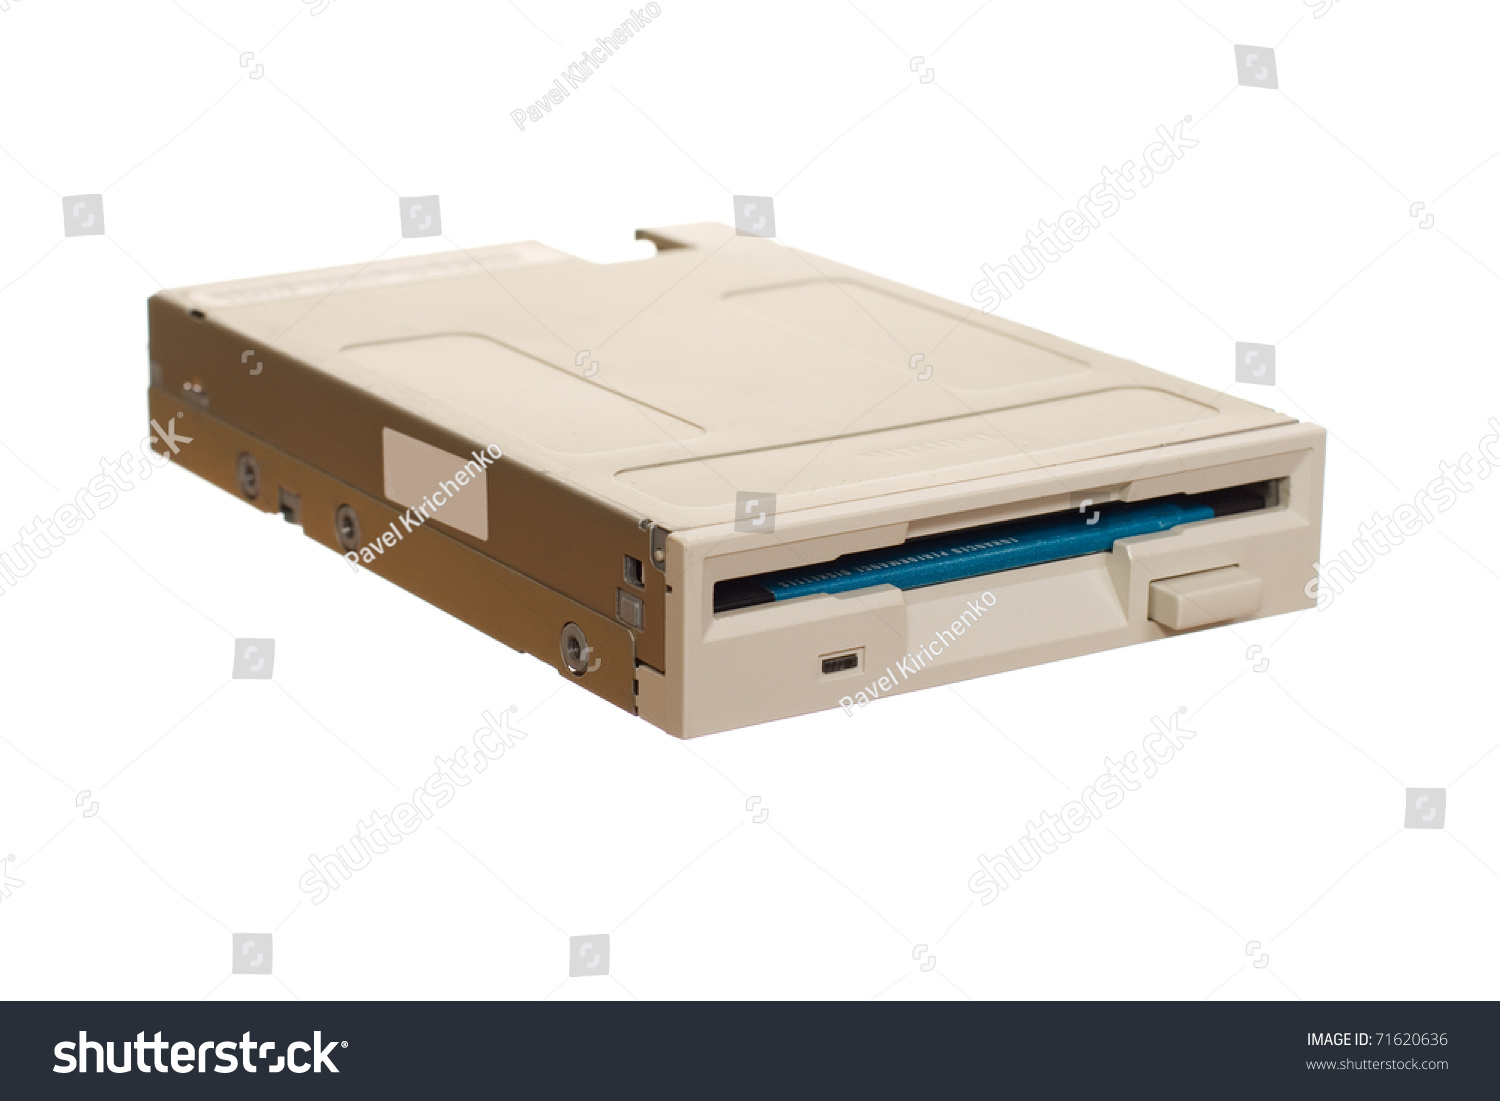 stock-photo-floppy-disk-drive-with-diskette-inserted-isolated-over-white-71620636.jpg